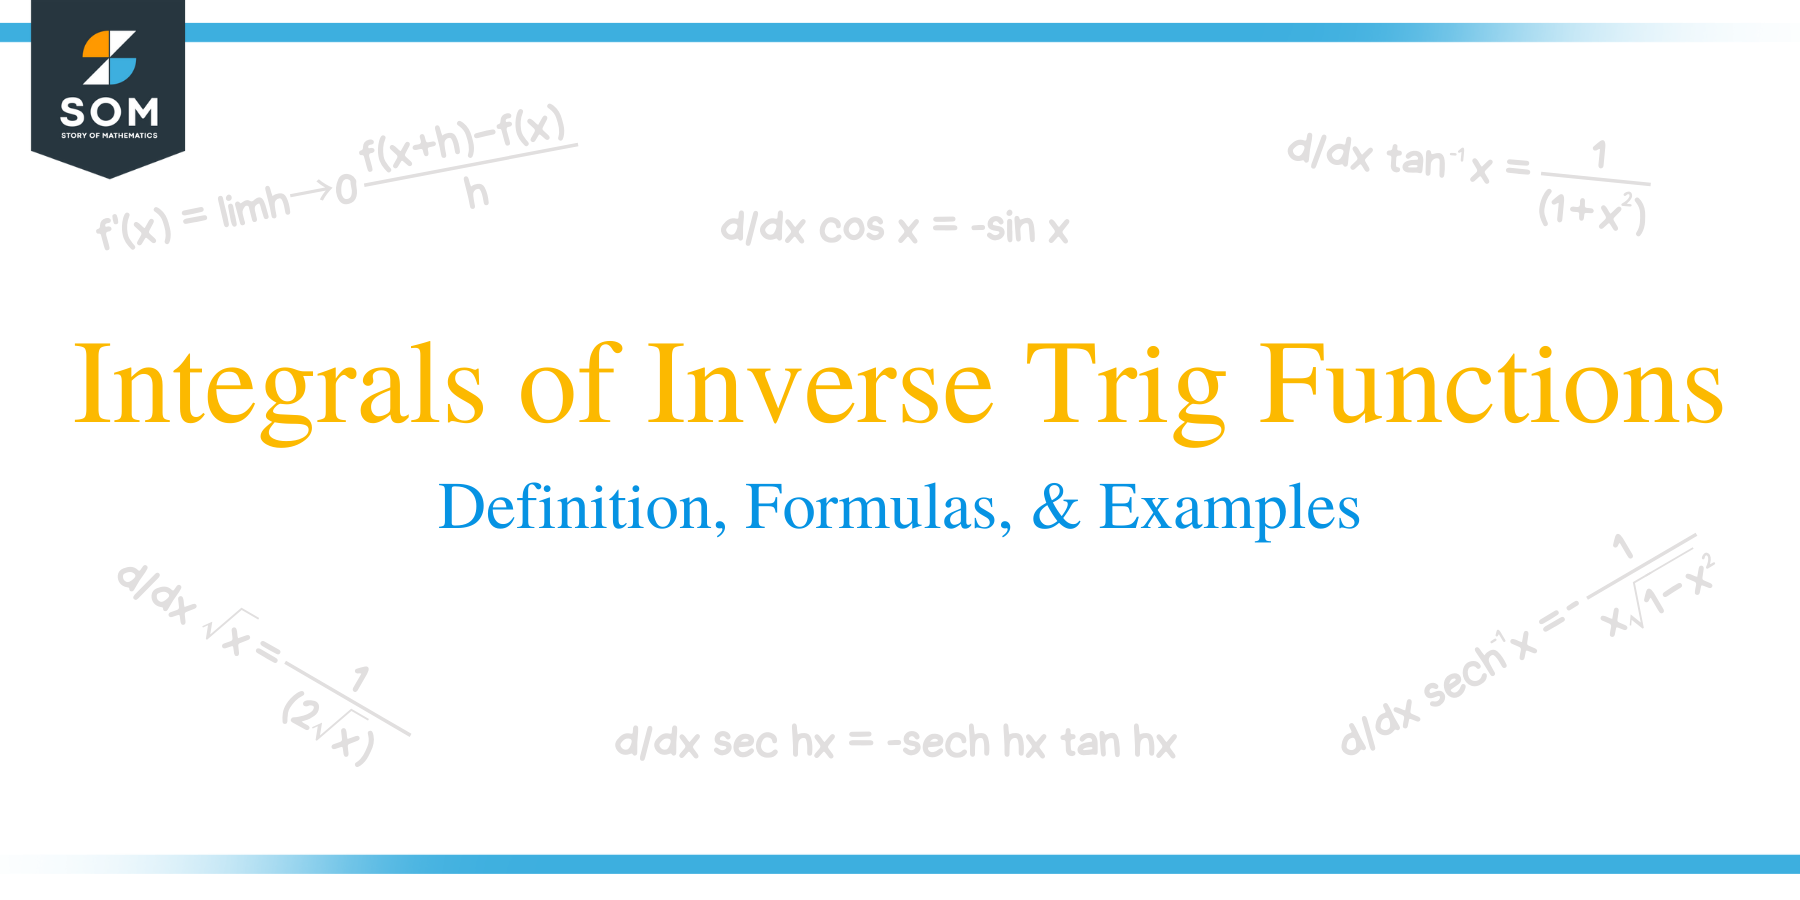 Integrals of Inverse Trig Functions